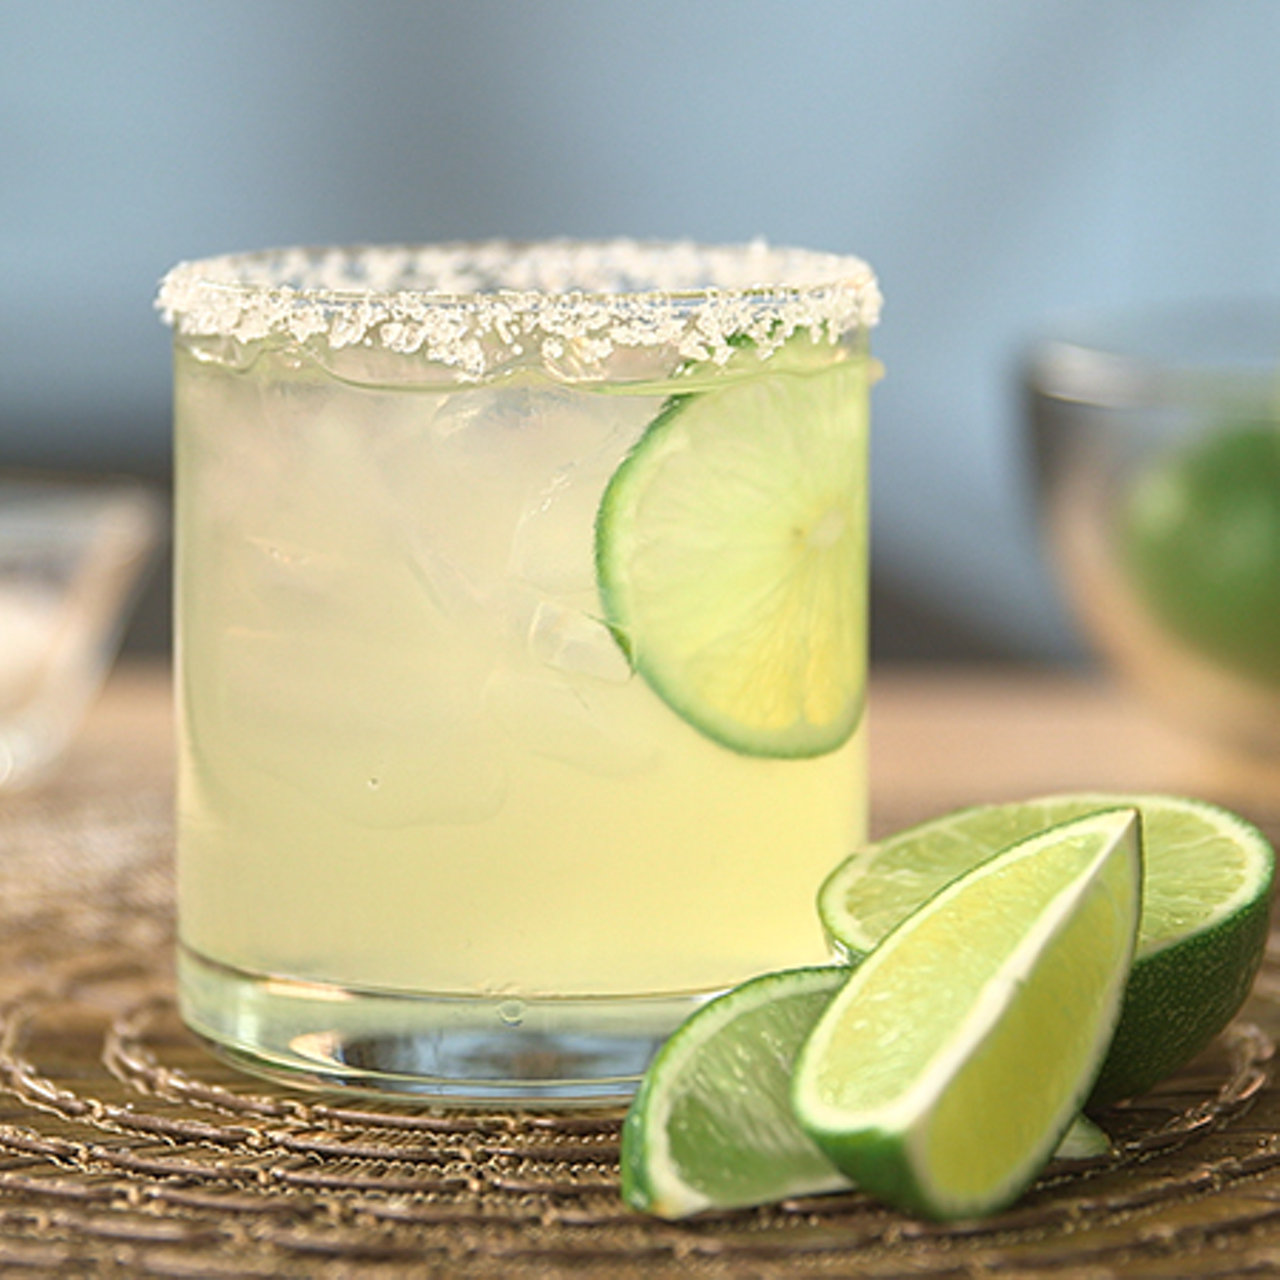 DID WE MENTION THE MARGS?! We promise Tres Agaves will be your new favorite tequila!